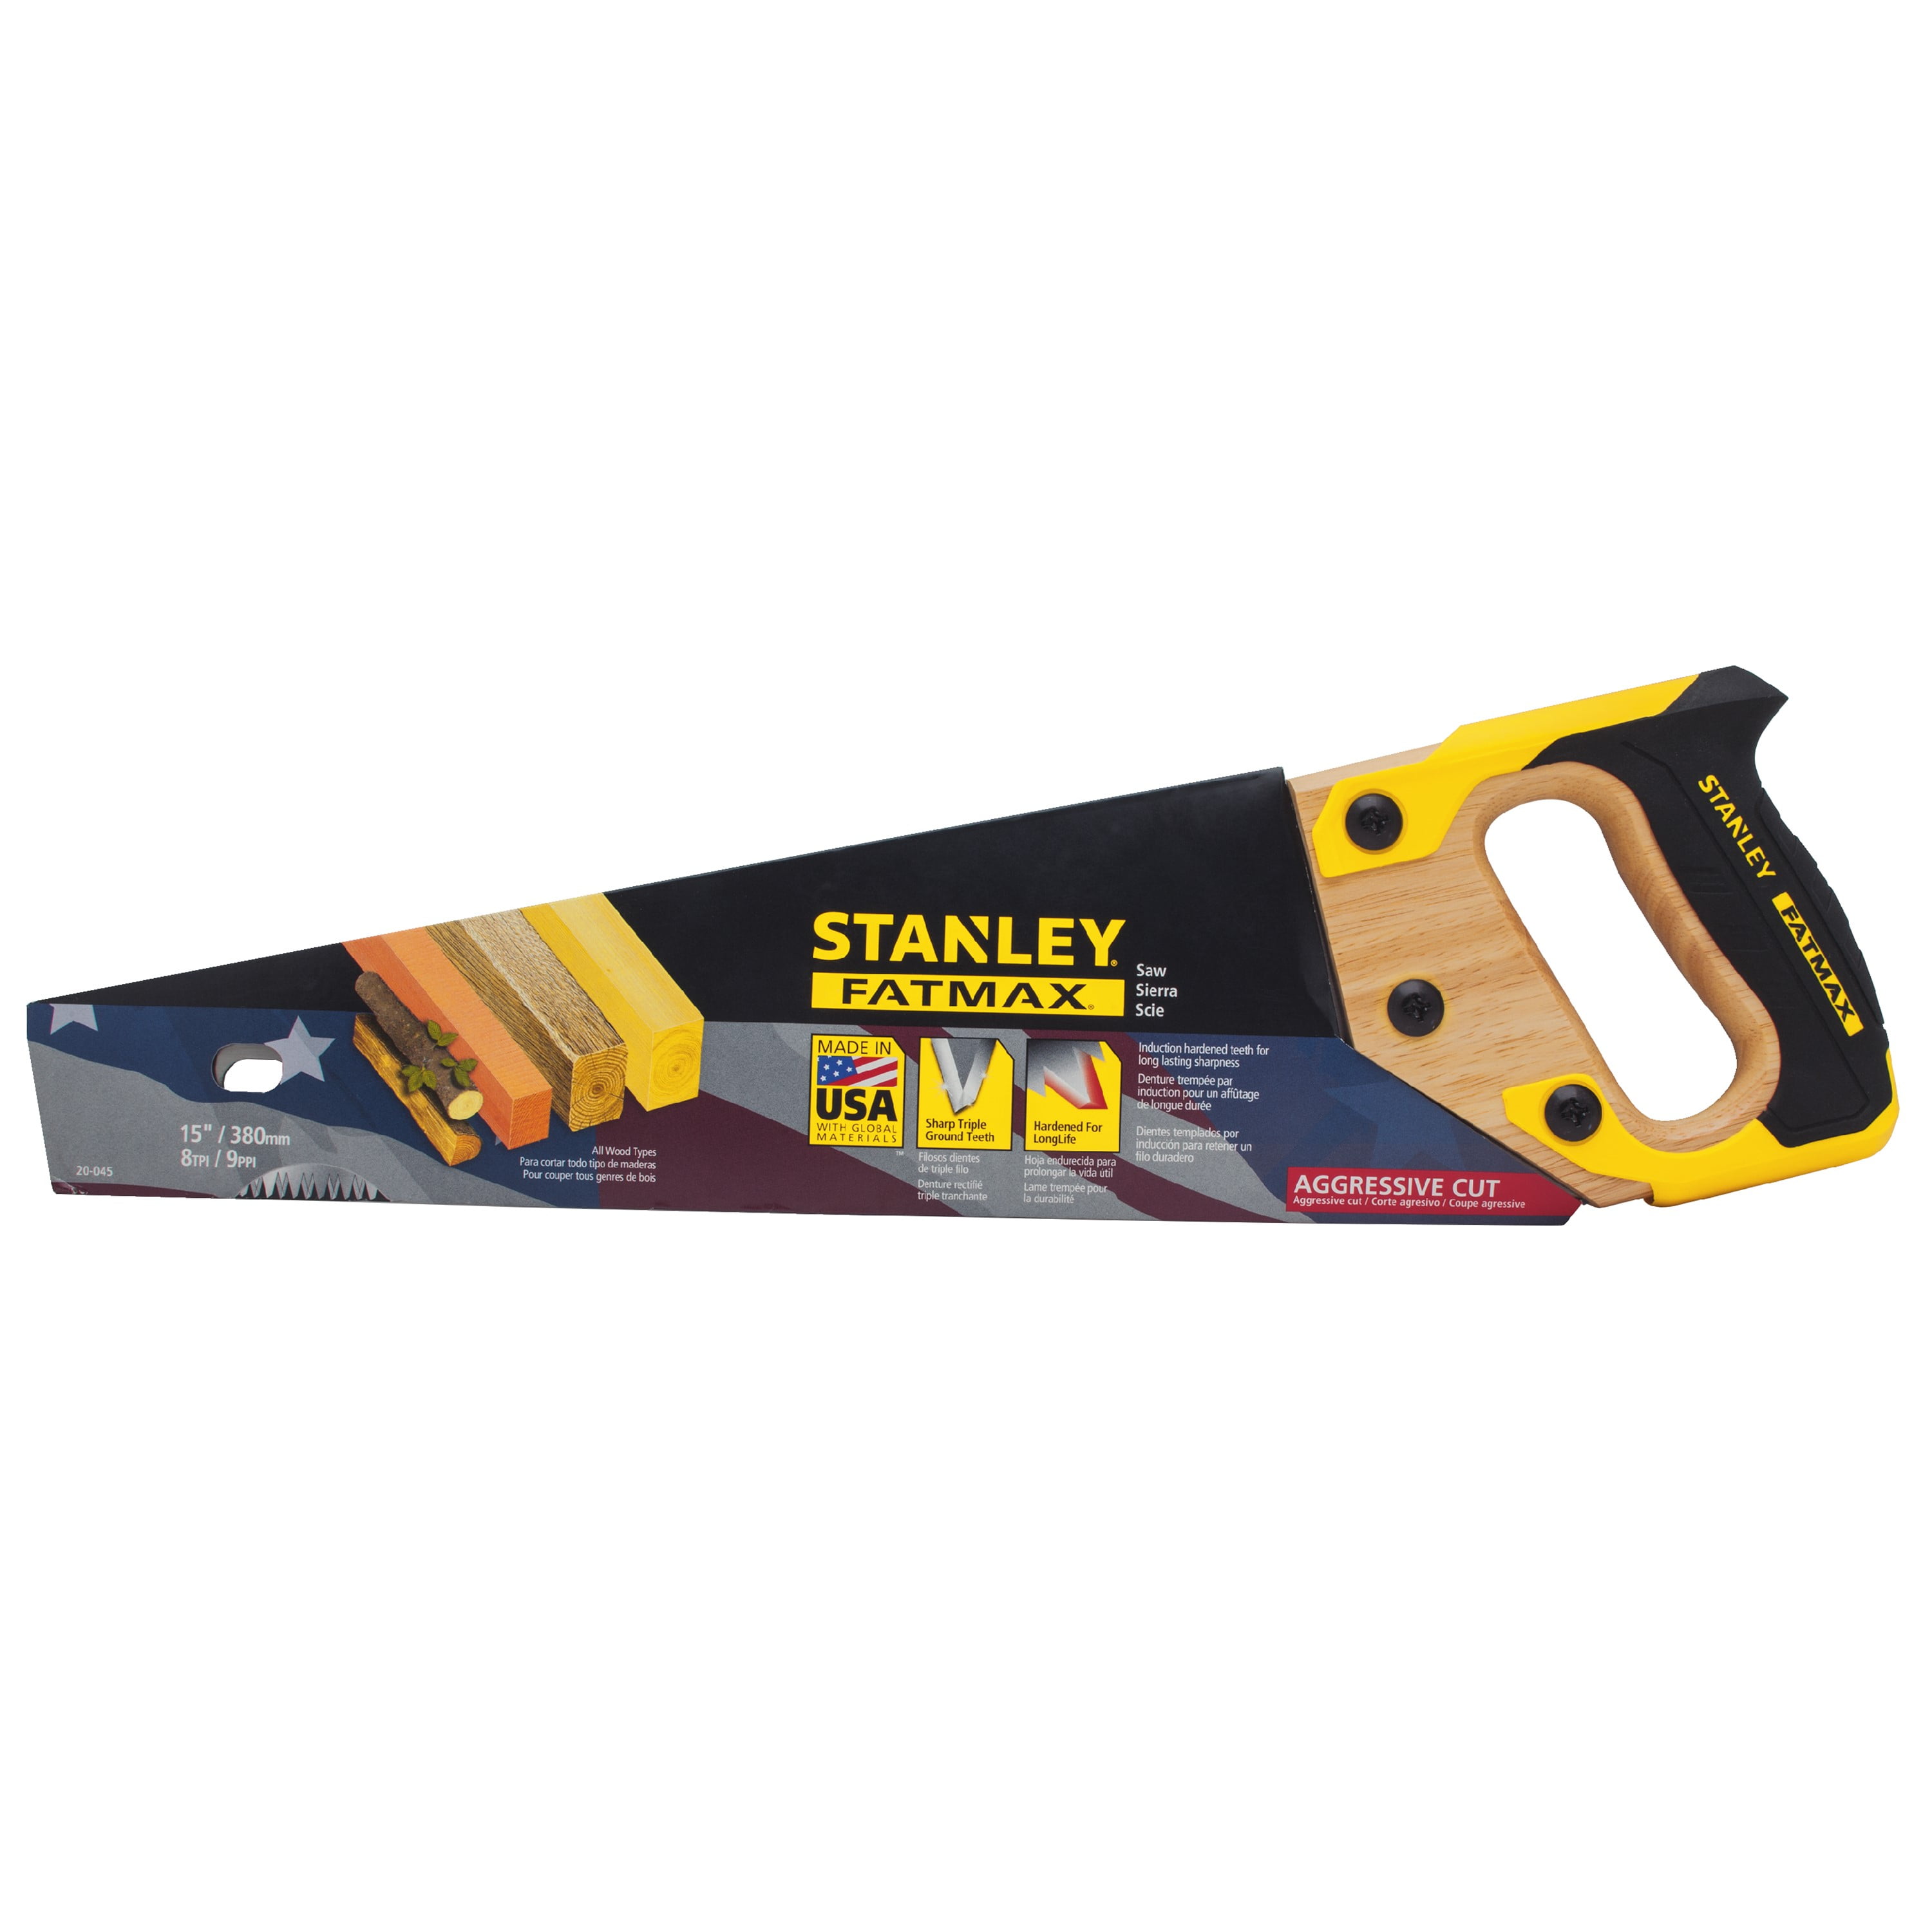 STANLEY FATMAX 20-045 Hand Saw, 15\